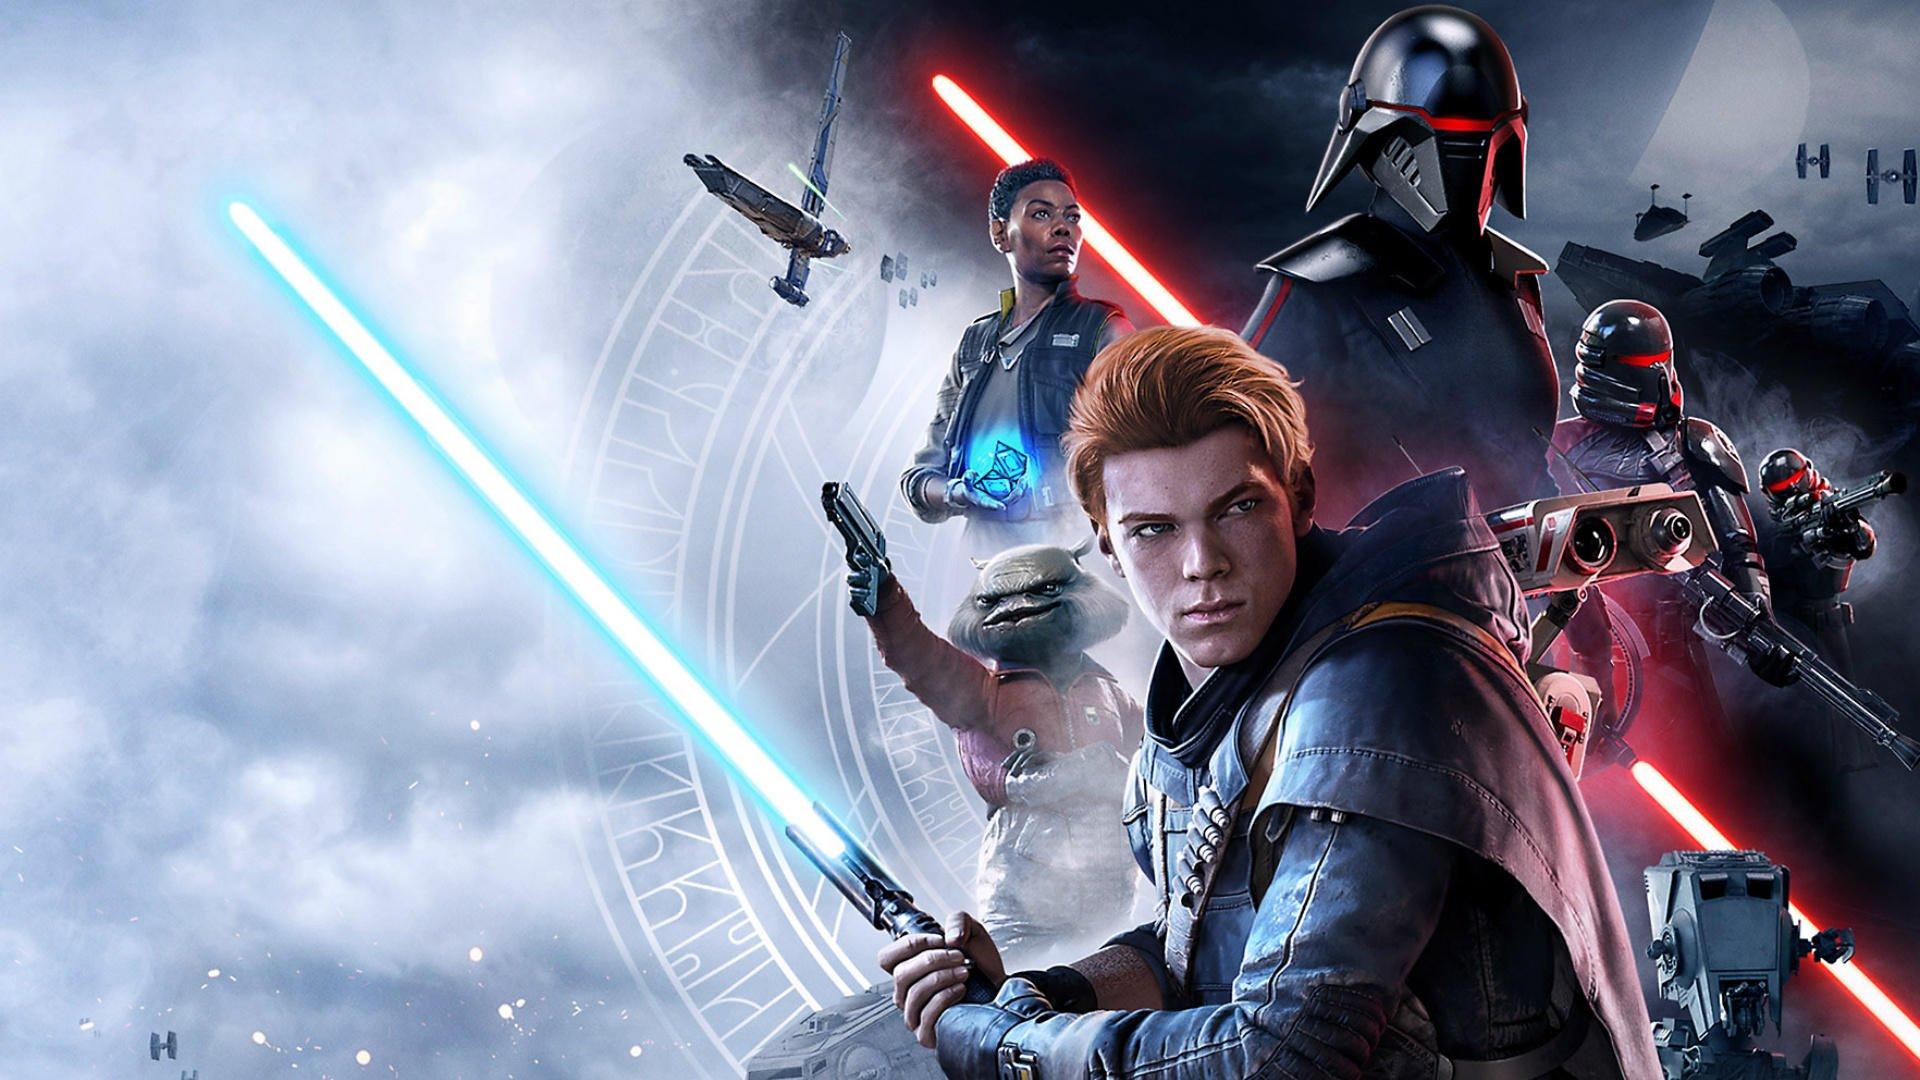 EA games are coming to Steam starting with Star Wars Jedi